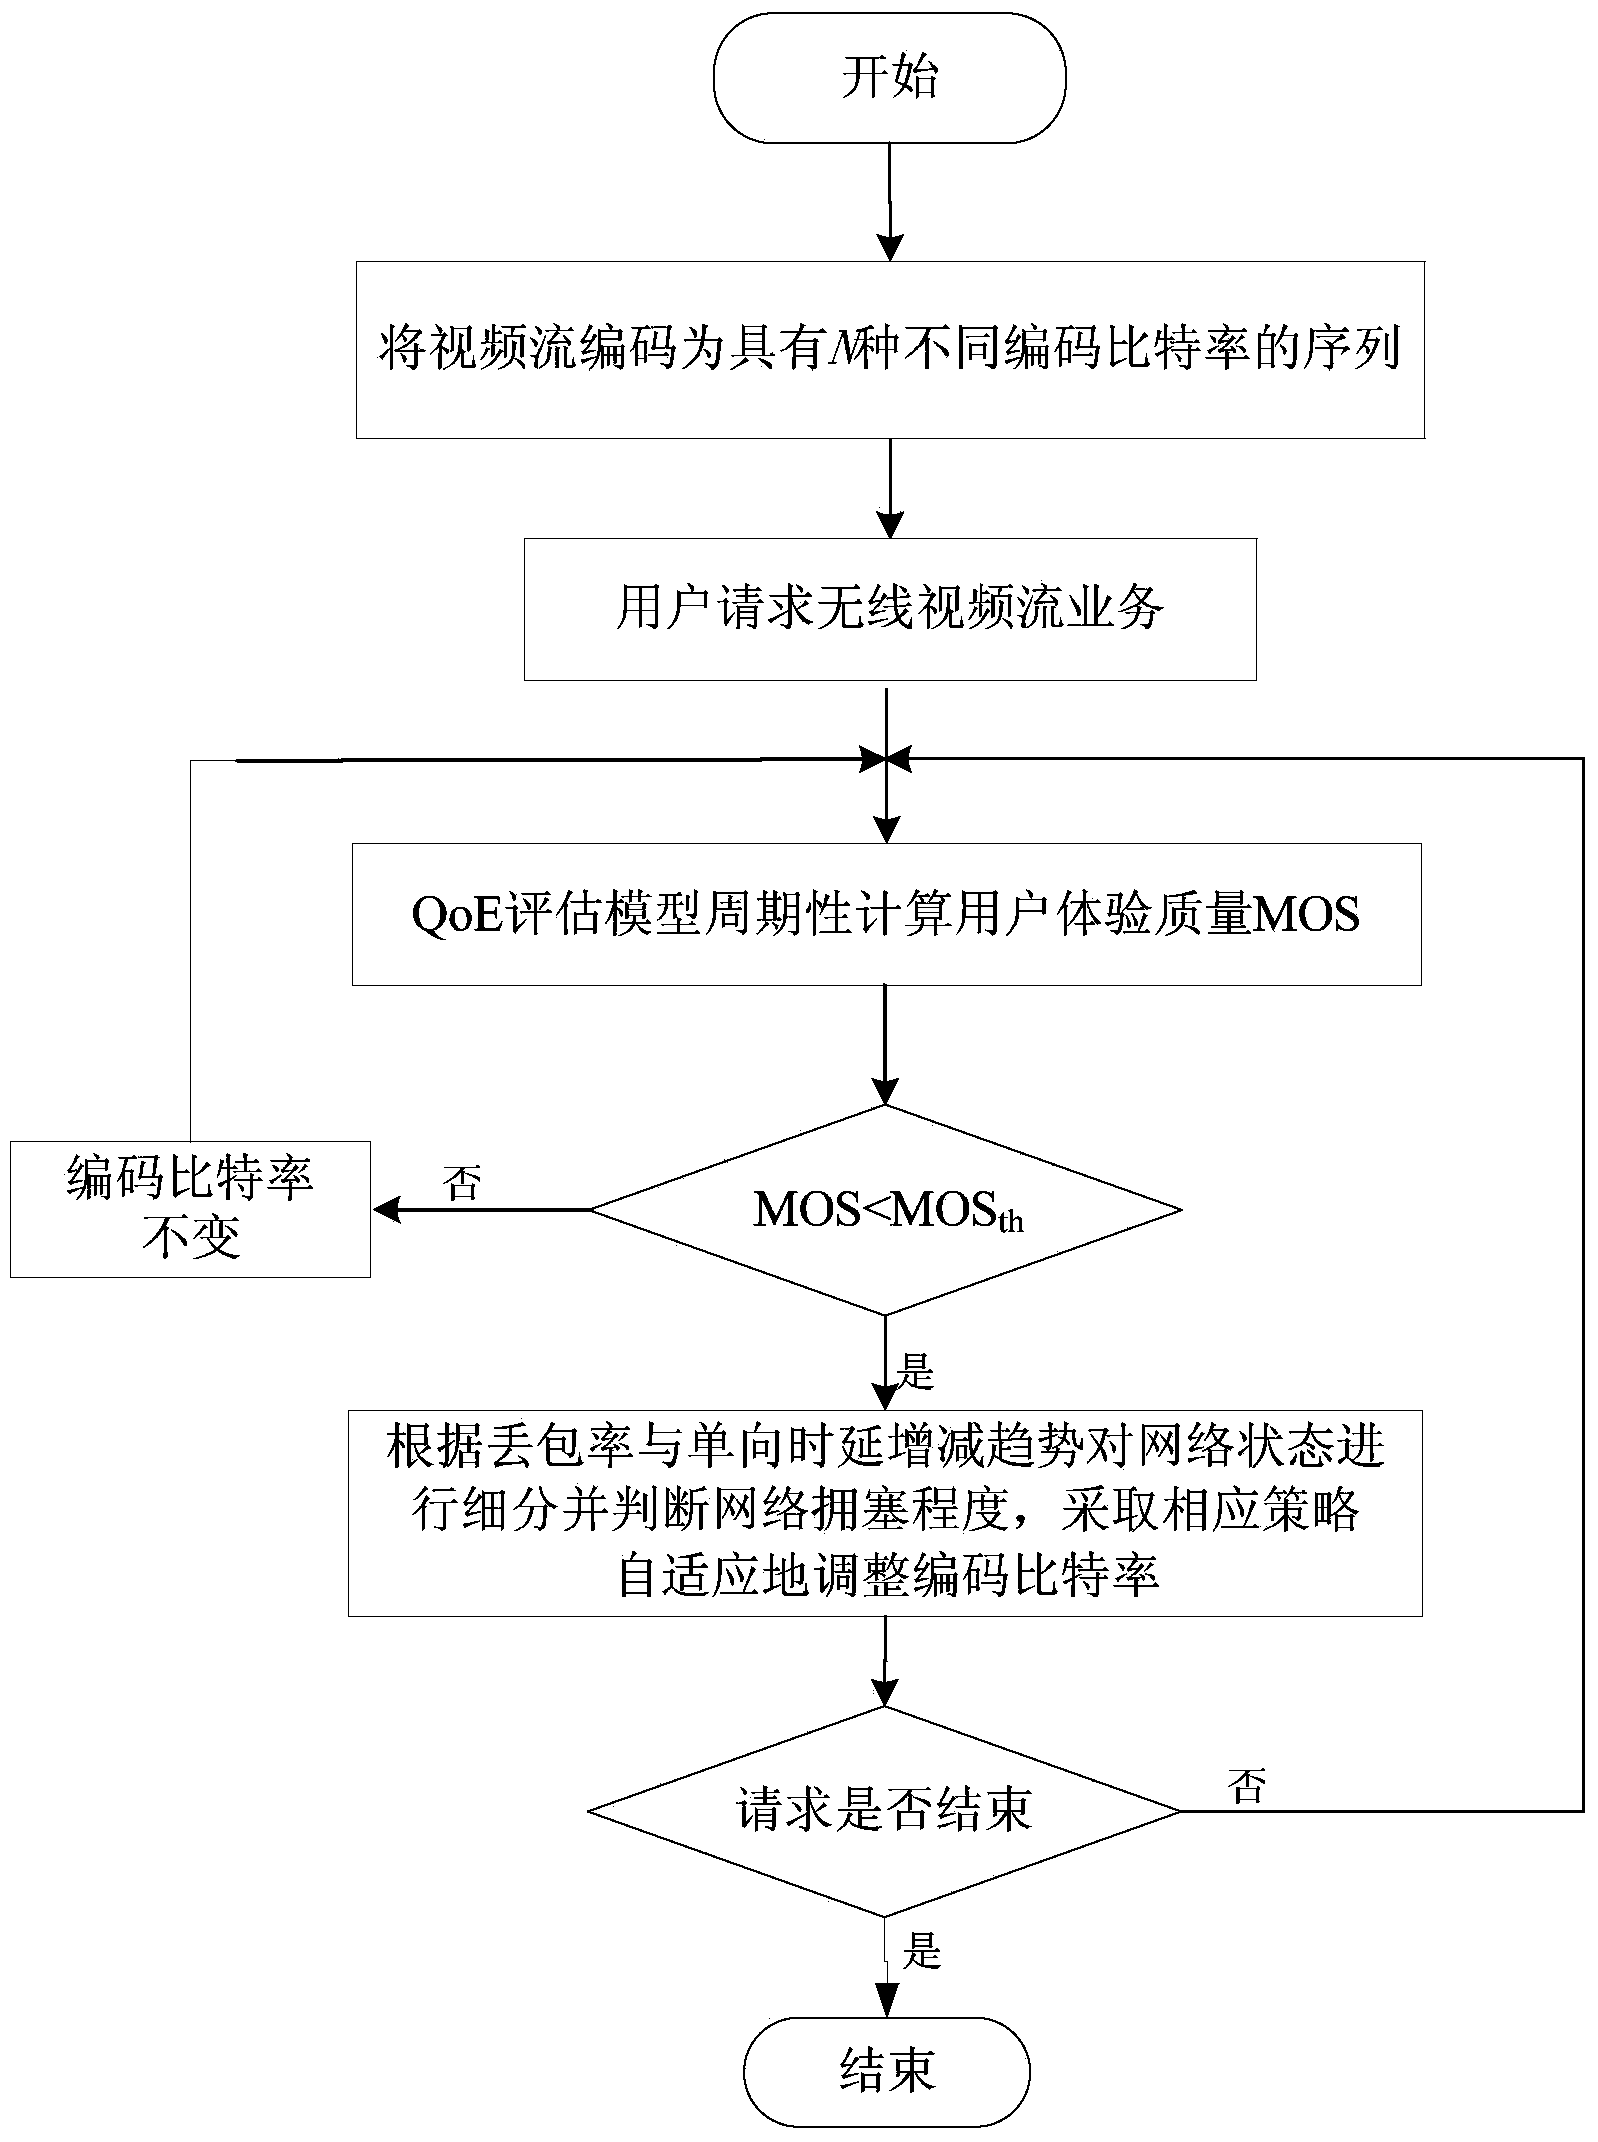 Wireless video streaming service self-adaption rate control method based on QoE